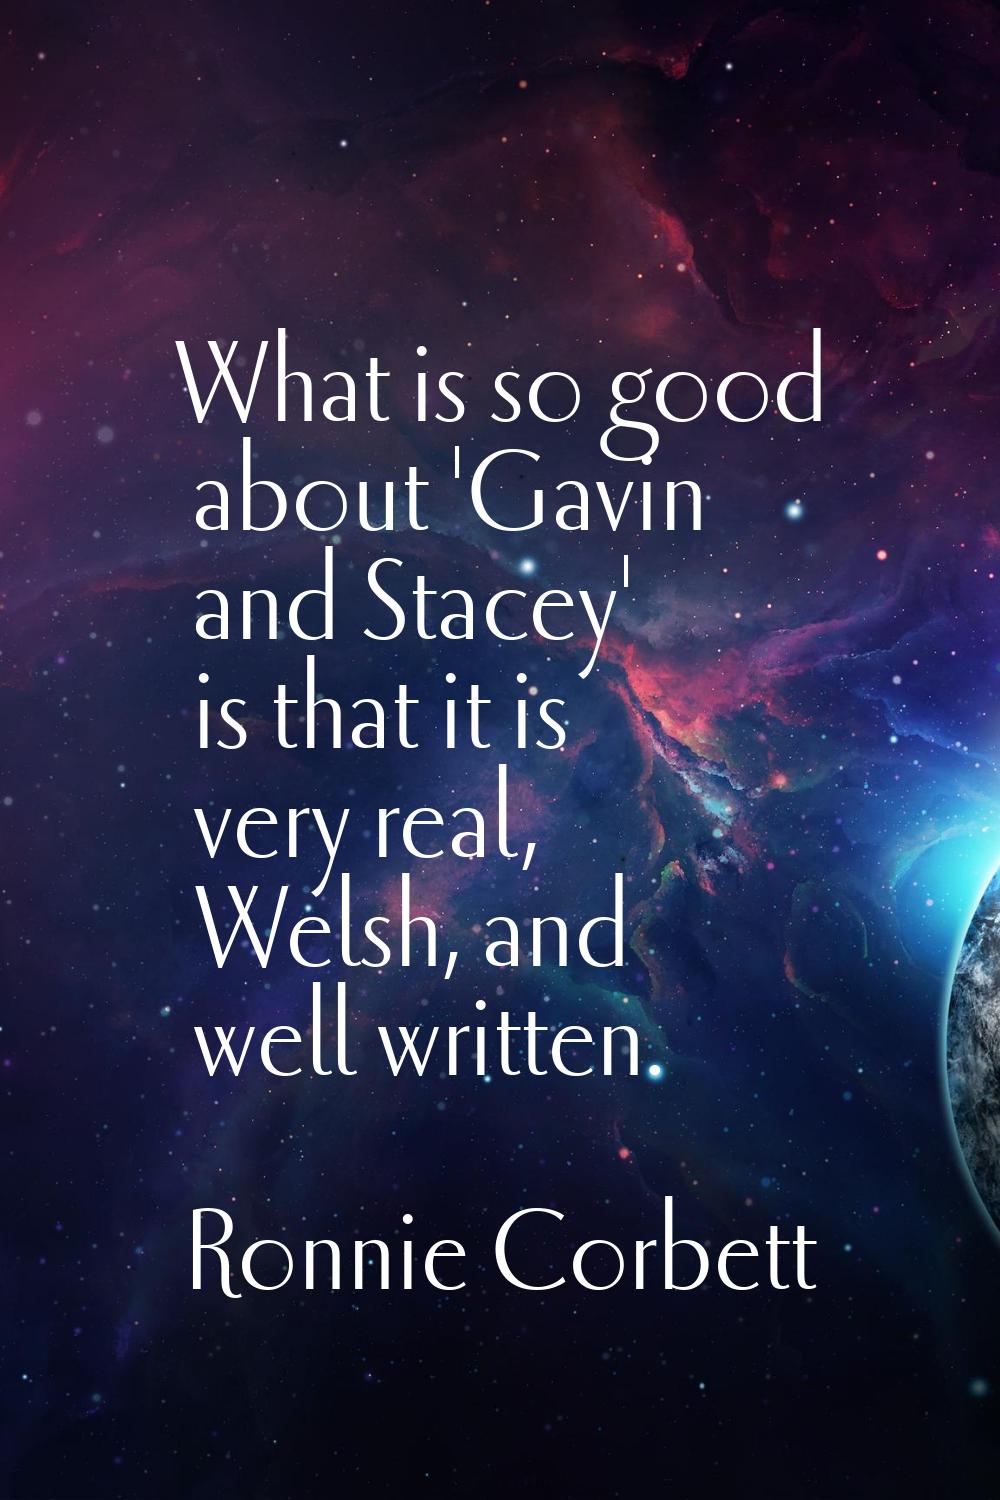 What is so good about 'Gavin and Stacey' is that it is very real, Welsh, and well written.